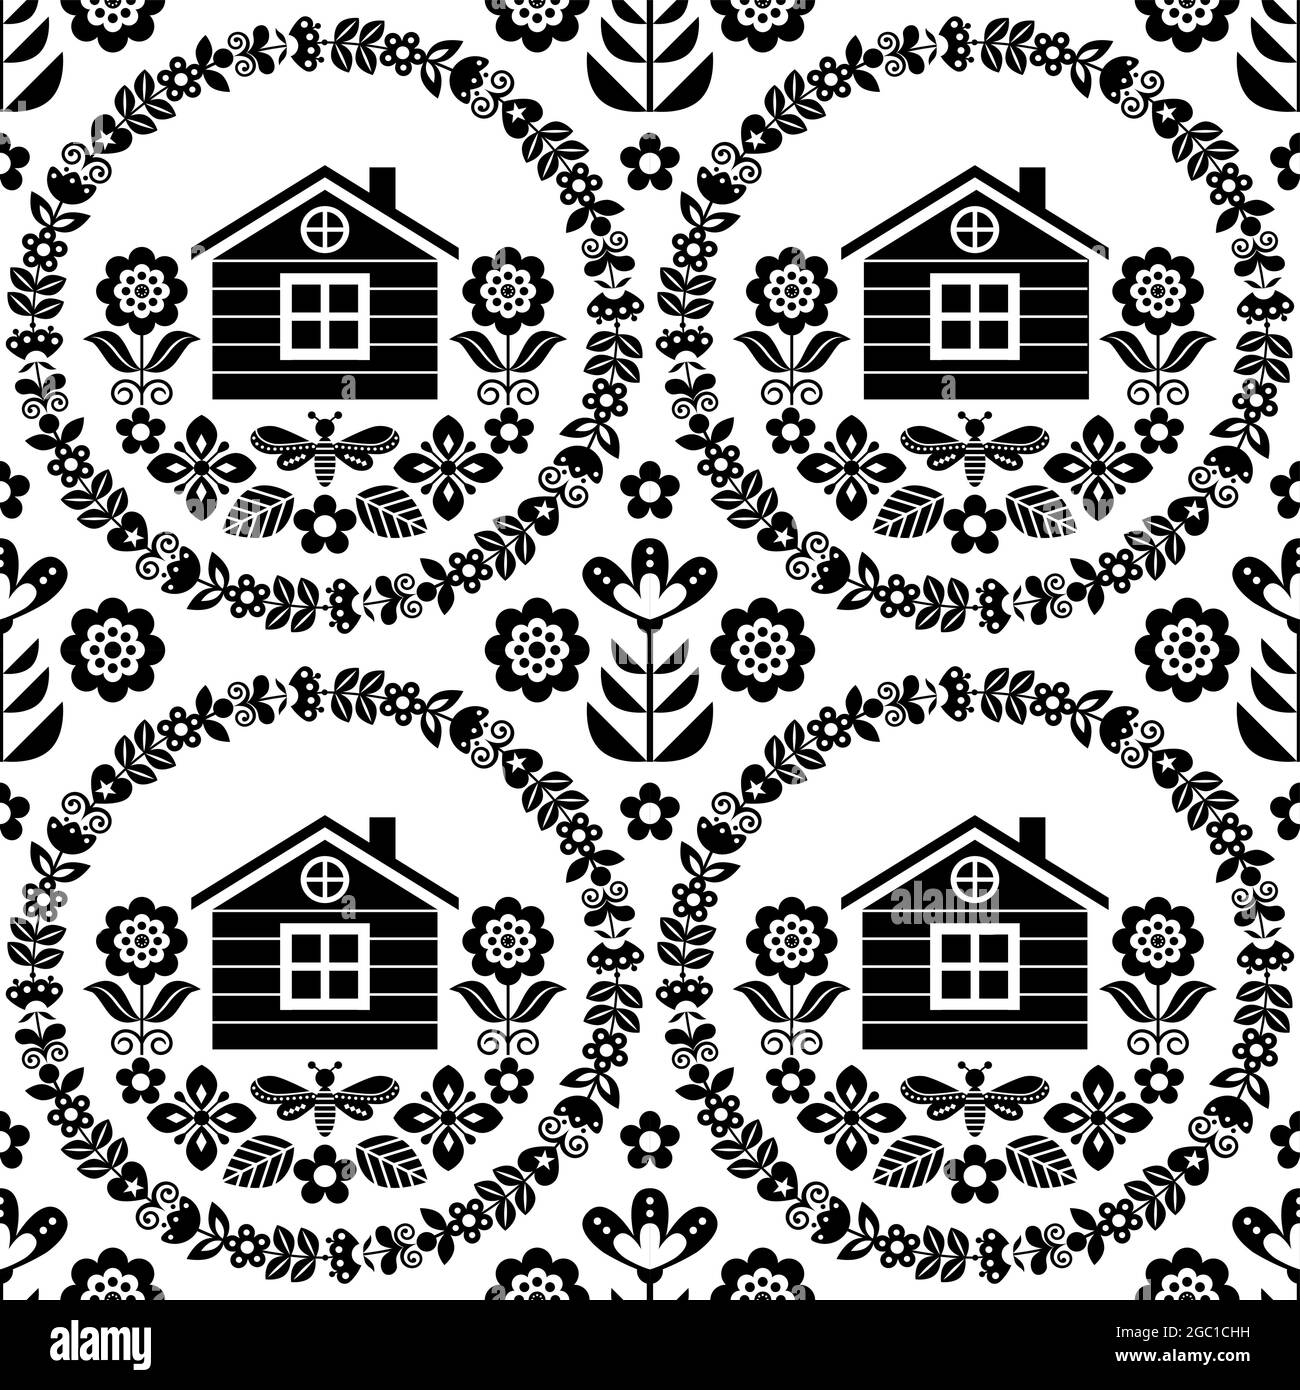 Scandinavian folk art seamless vector floral mandala pattern with Finnish or Norwegian house, retro black and white textile design or fabric print Stock Vector